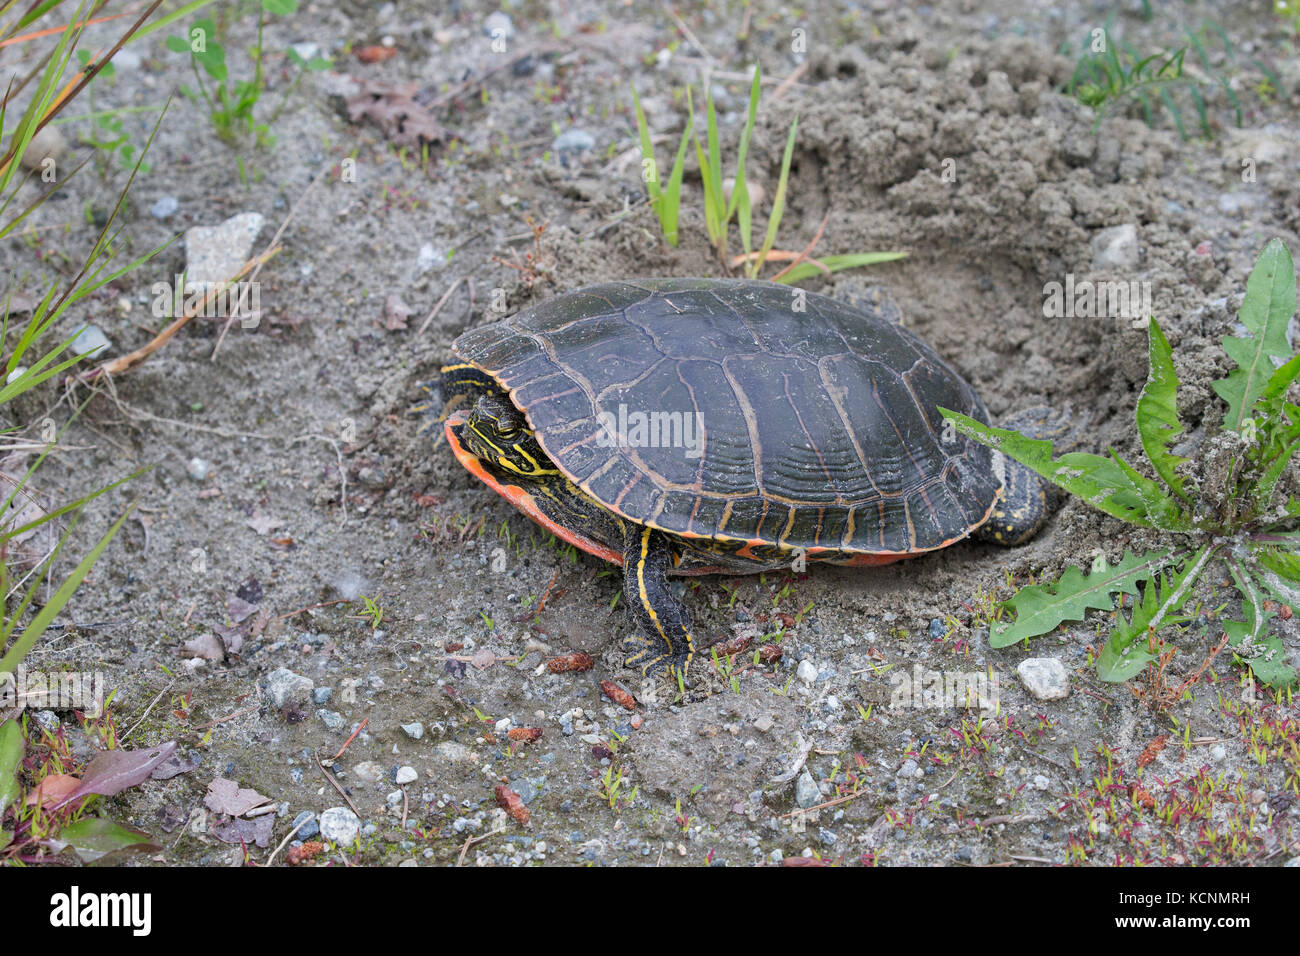 Western painted turtle (Chrysemys picta bellii), female using her hind legs to fill in her nest cavity where she has just laid a clutch of eggs, Nicomen Slough, Agassiz, British Columbia, Canada Stock Photo